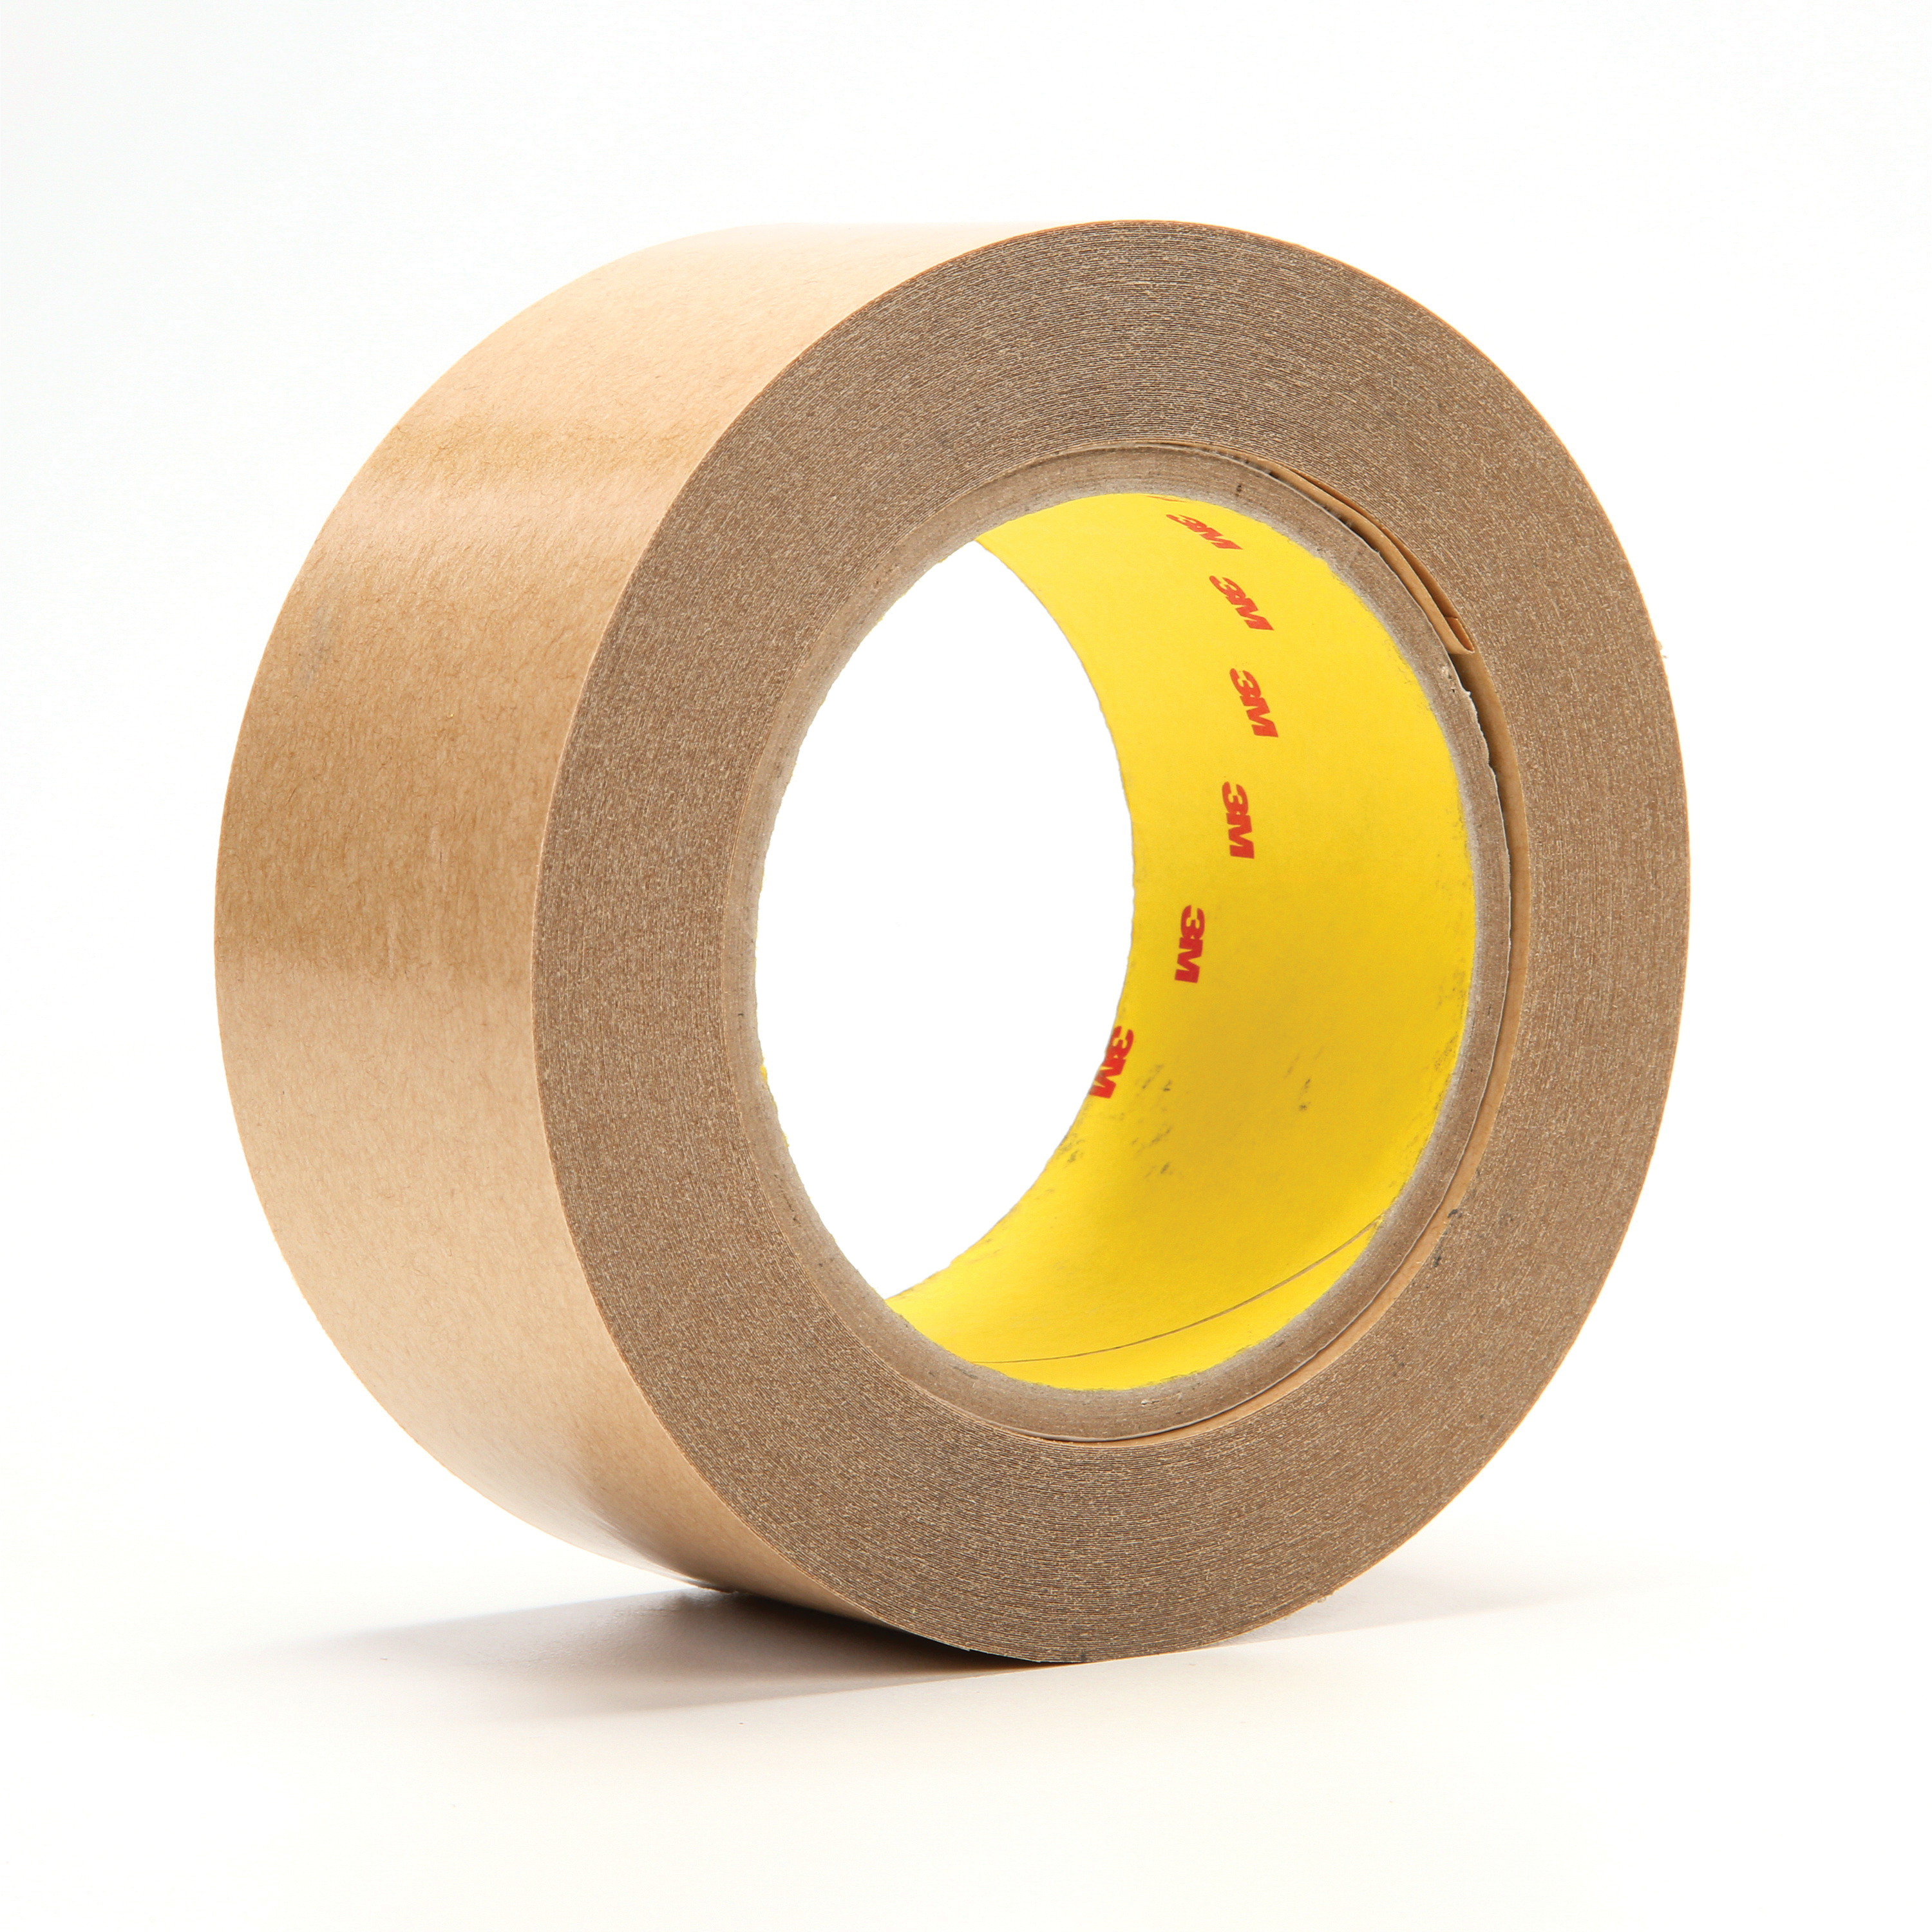 3M Scotch 665 Removable Repositionable Double Sided Tape